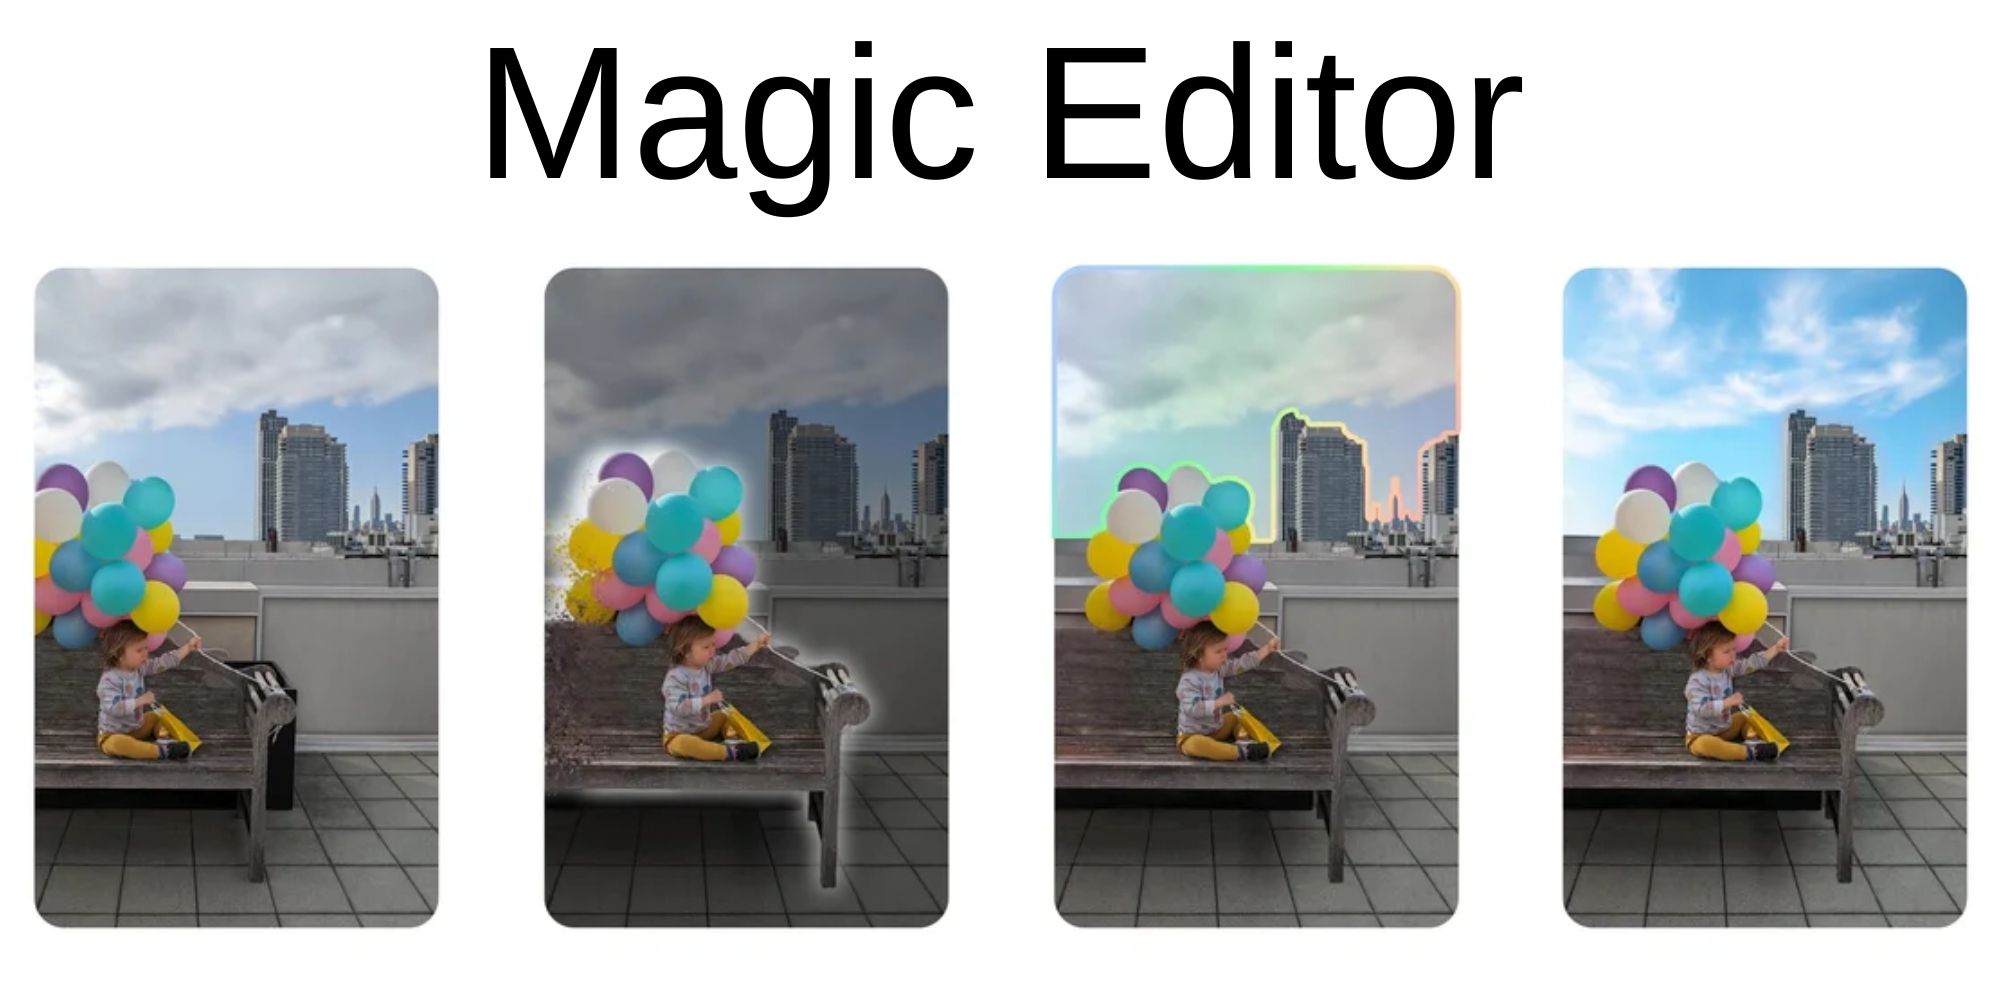 Magic Editor enables users to add new elements to pictures